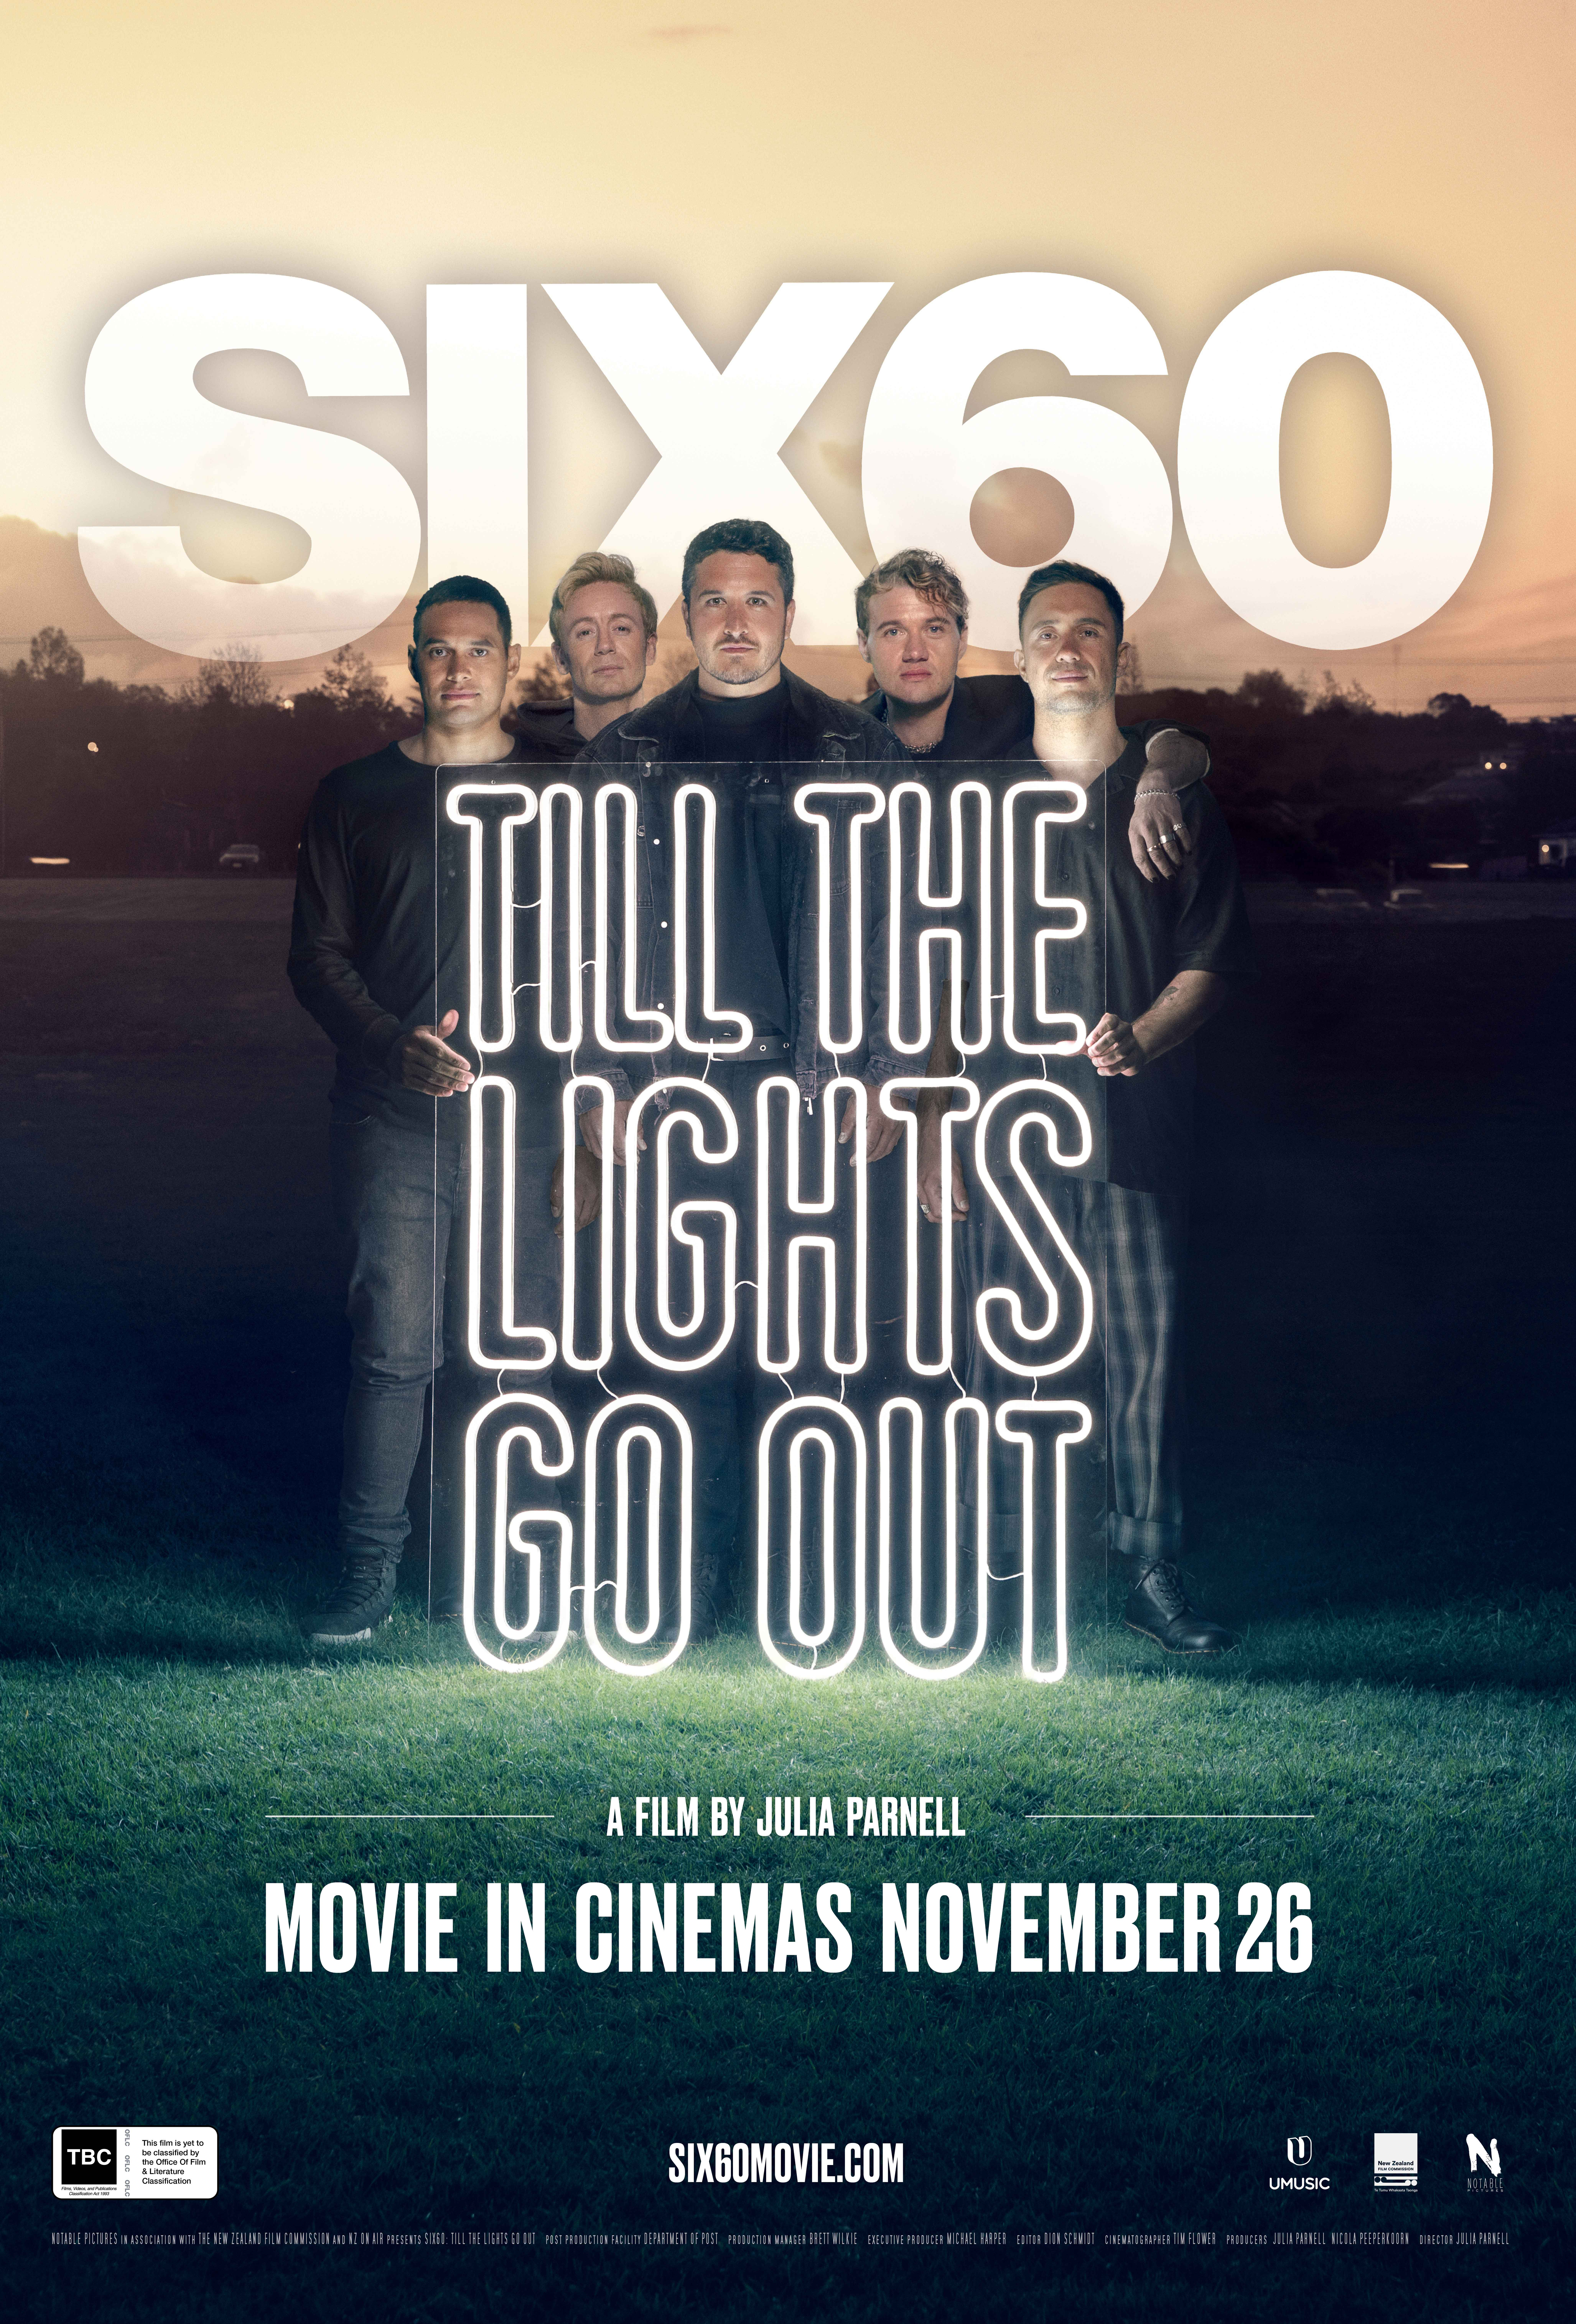 SIX60: Till the Lights Go Out (2020)